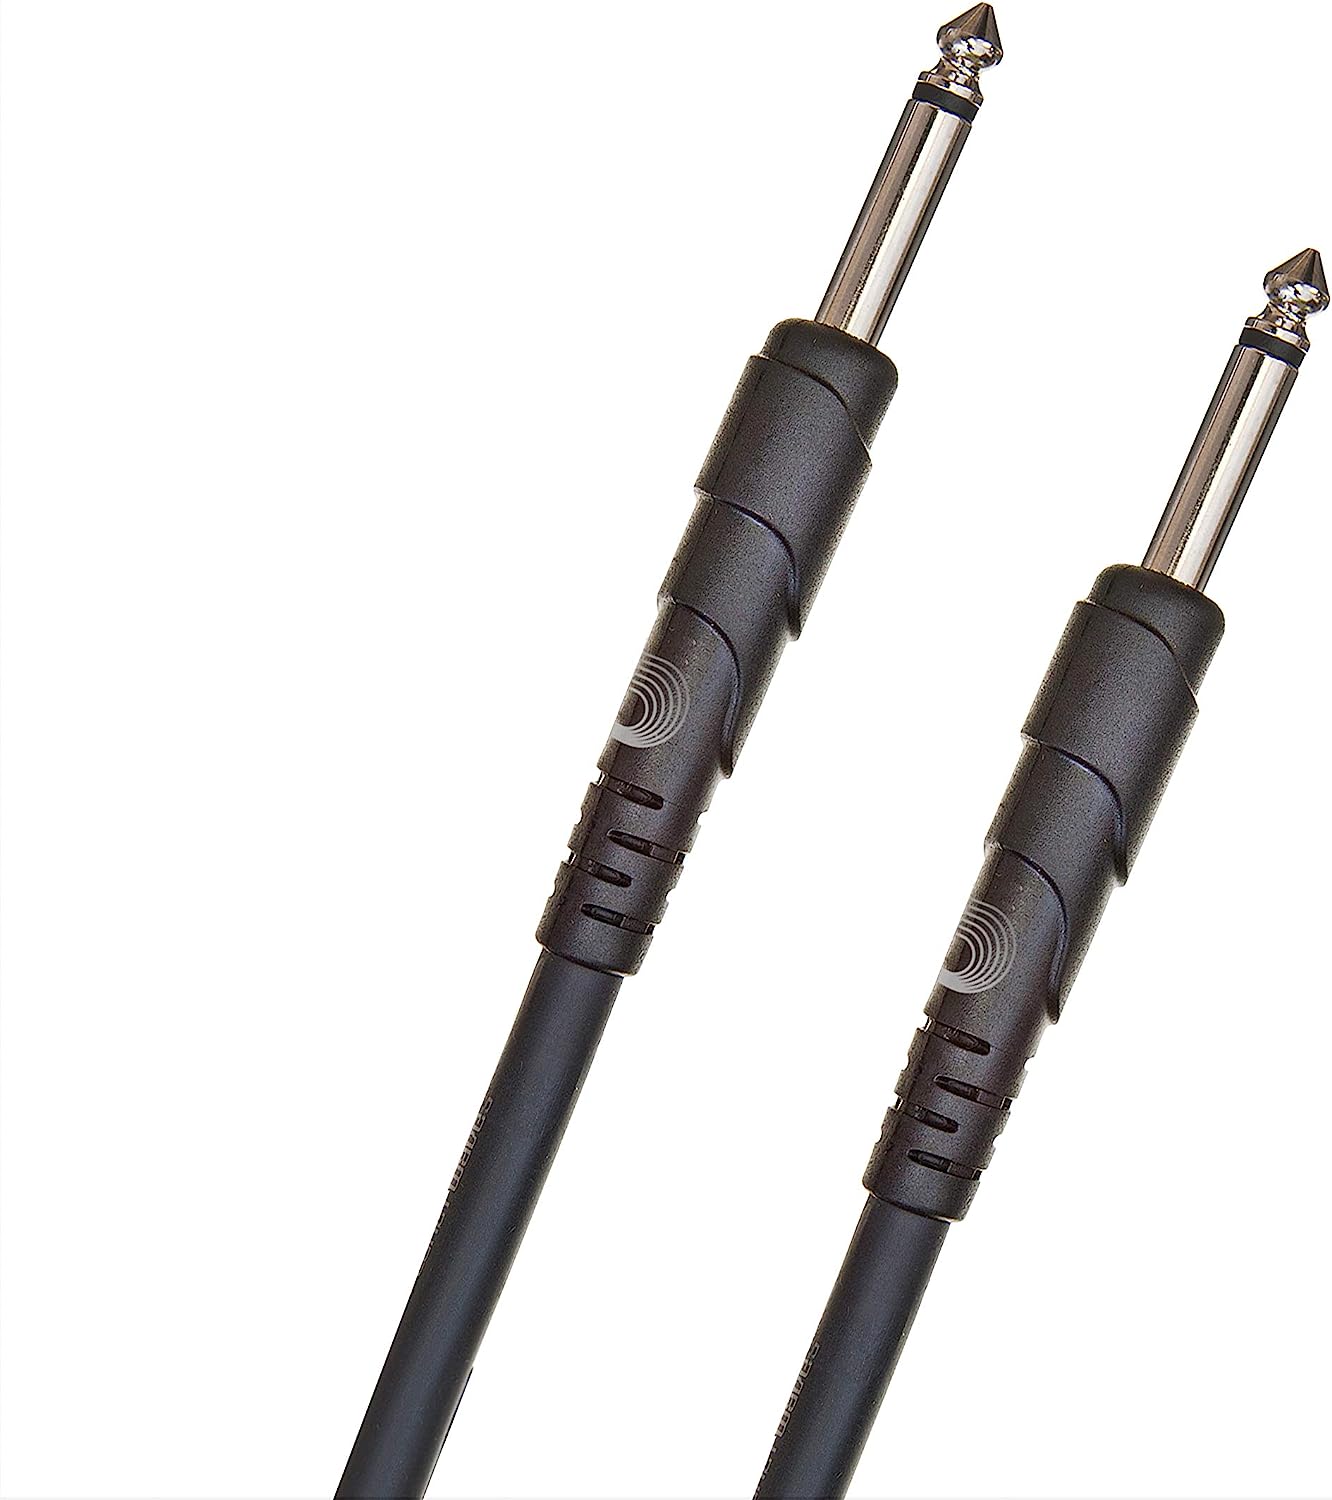 D'Addario Speaker Cable - Shielded for Noise Reduction [...]